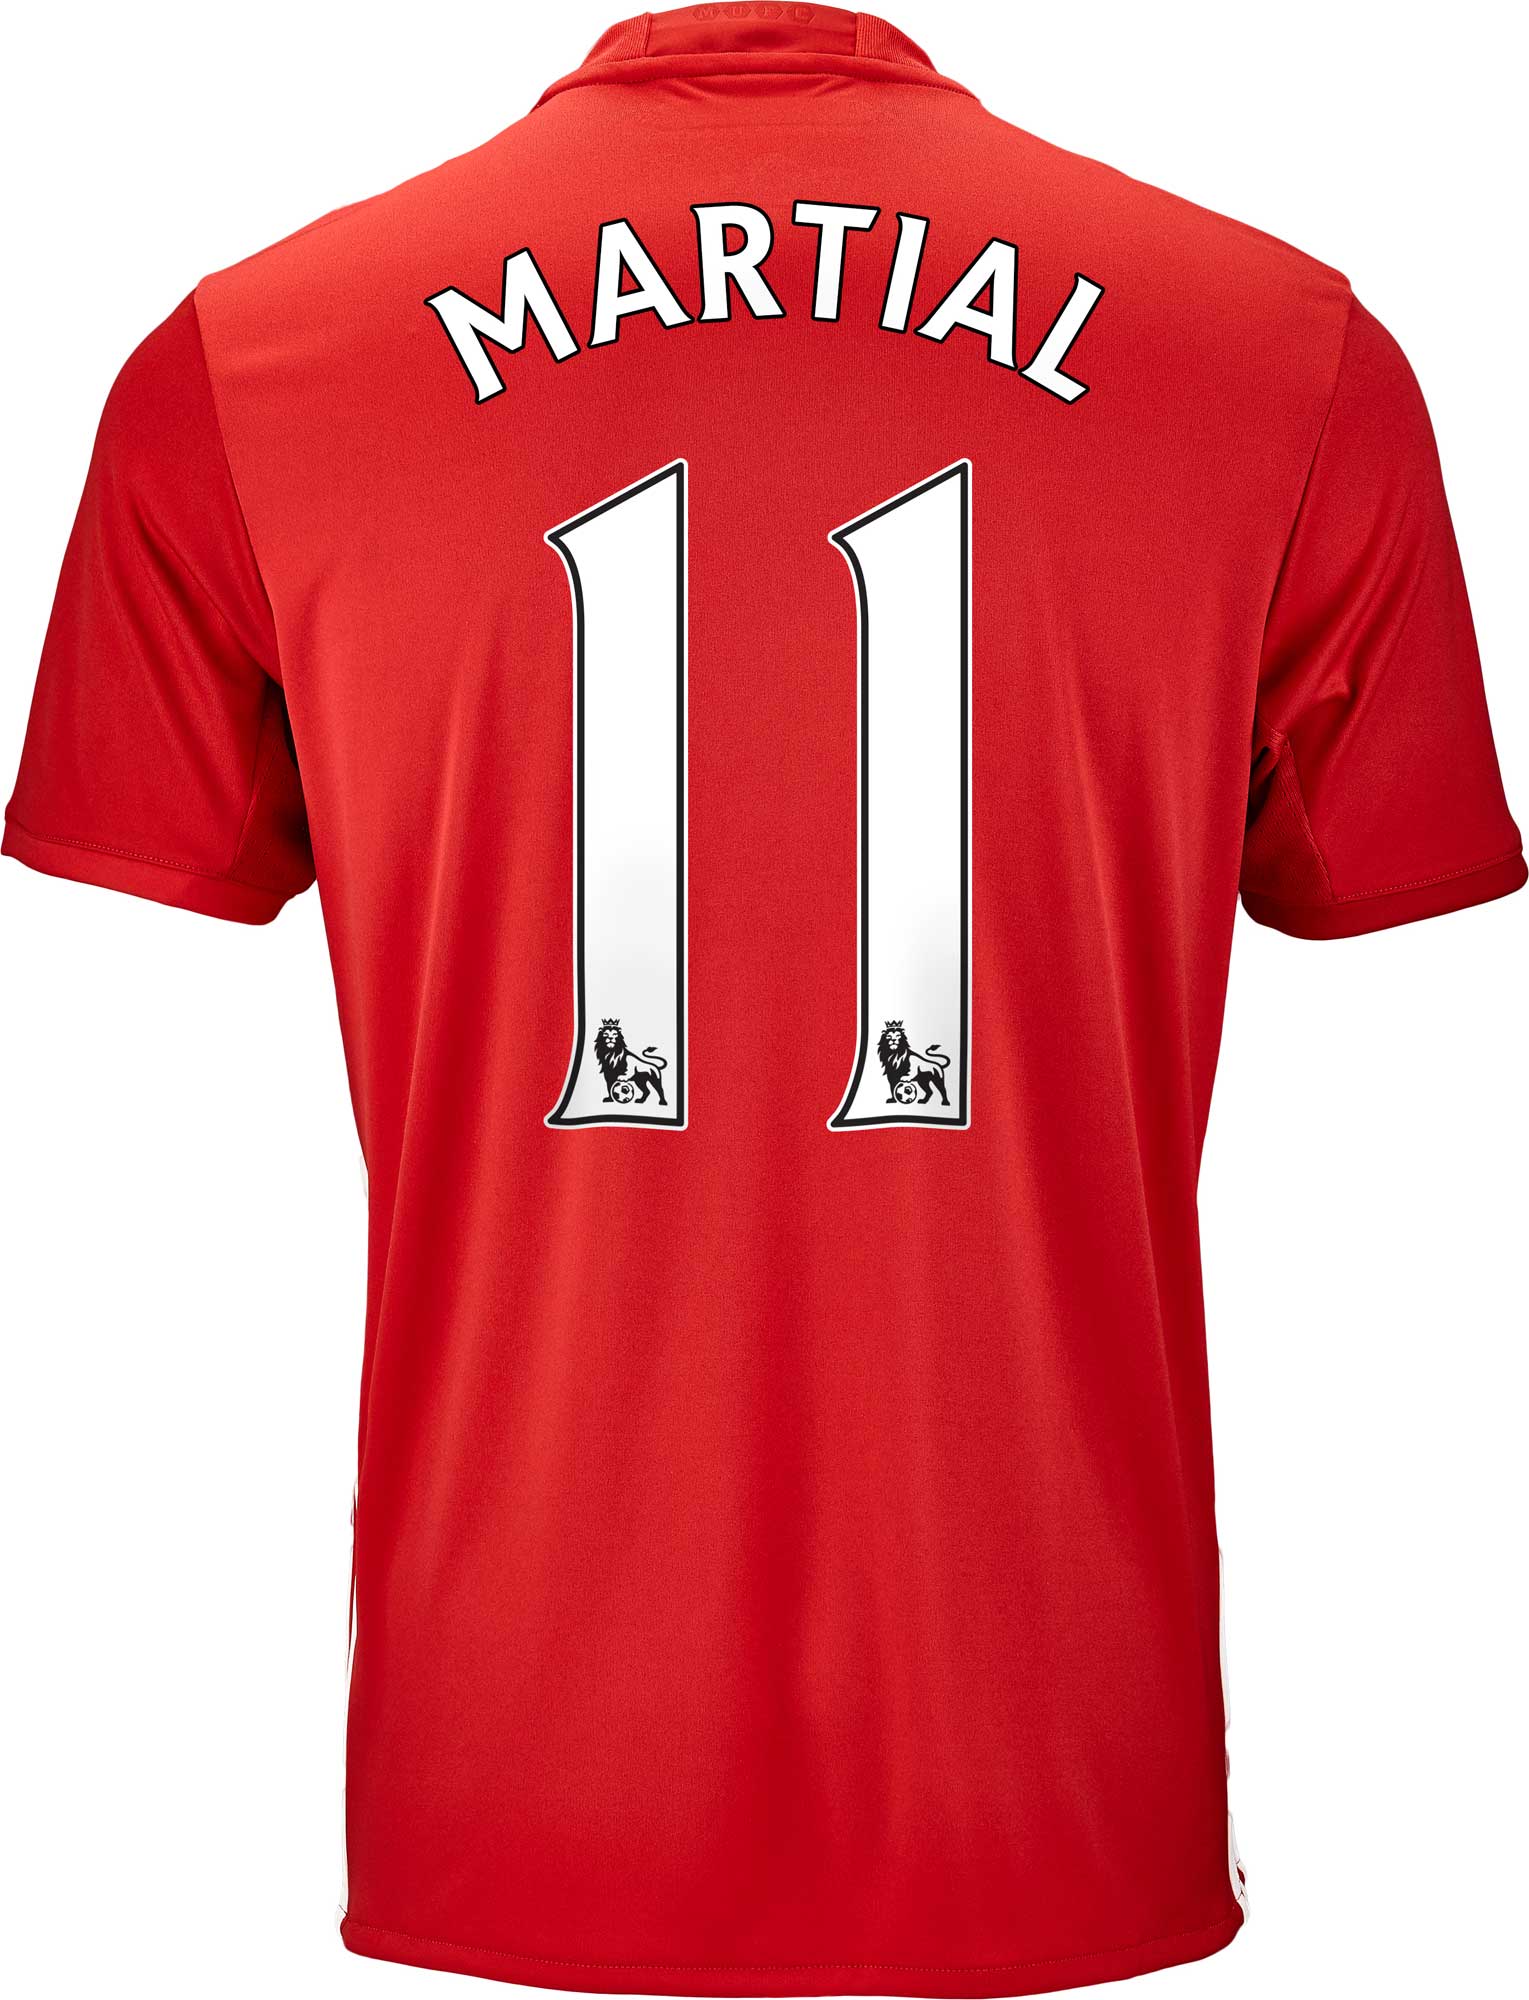 manchester united martial jersey